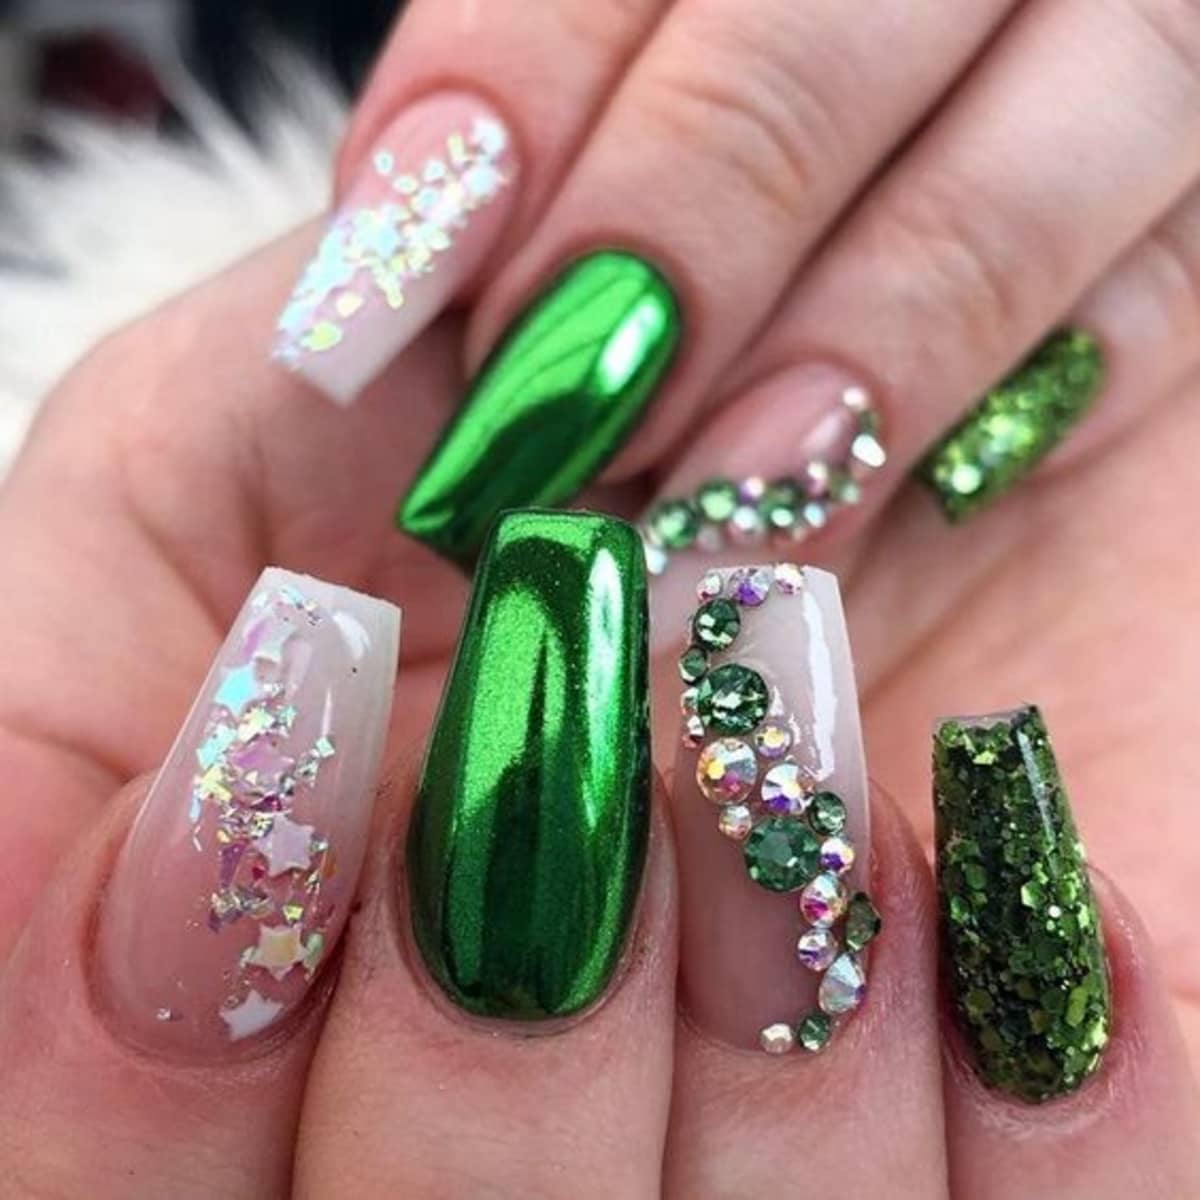 20 Best Gel Nail Designs and Ideas That'll Look Cute for 2022